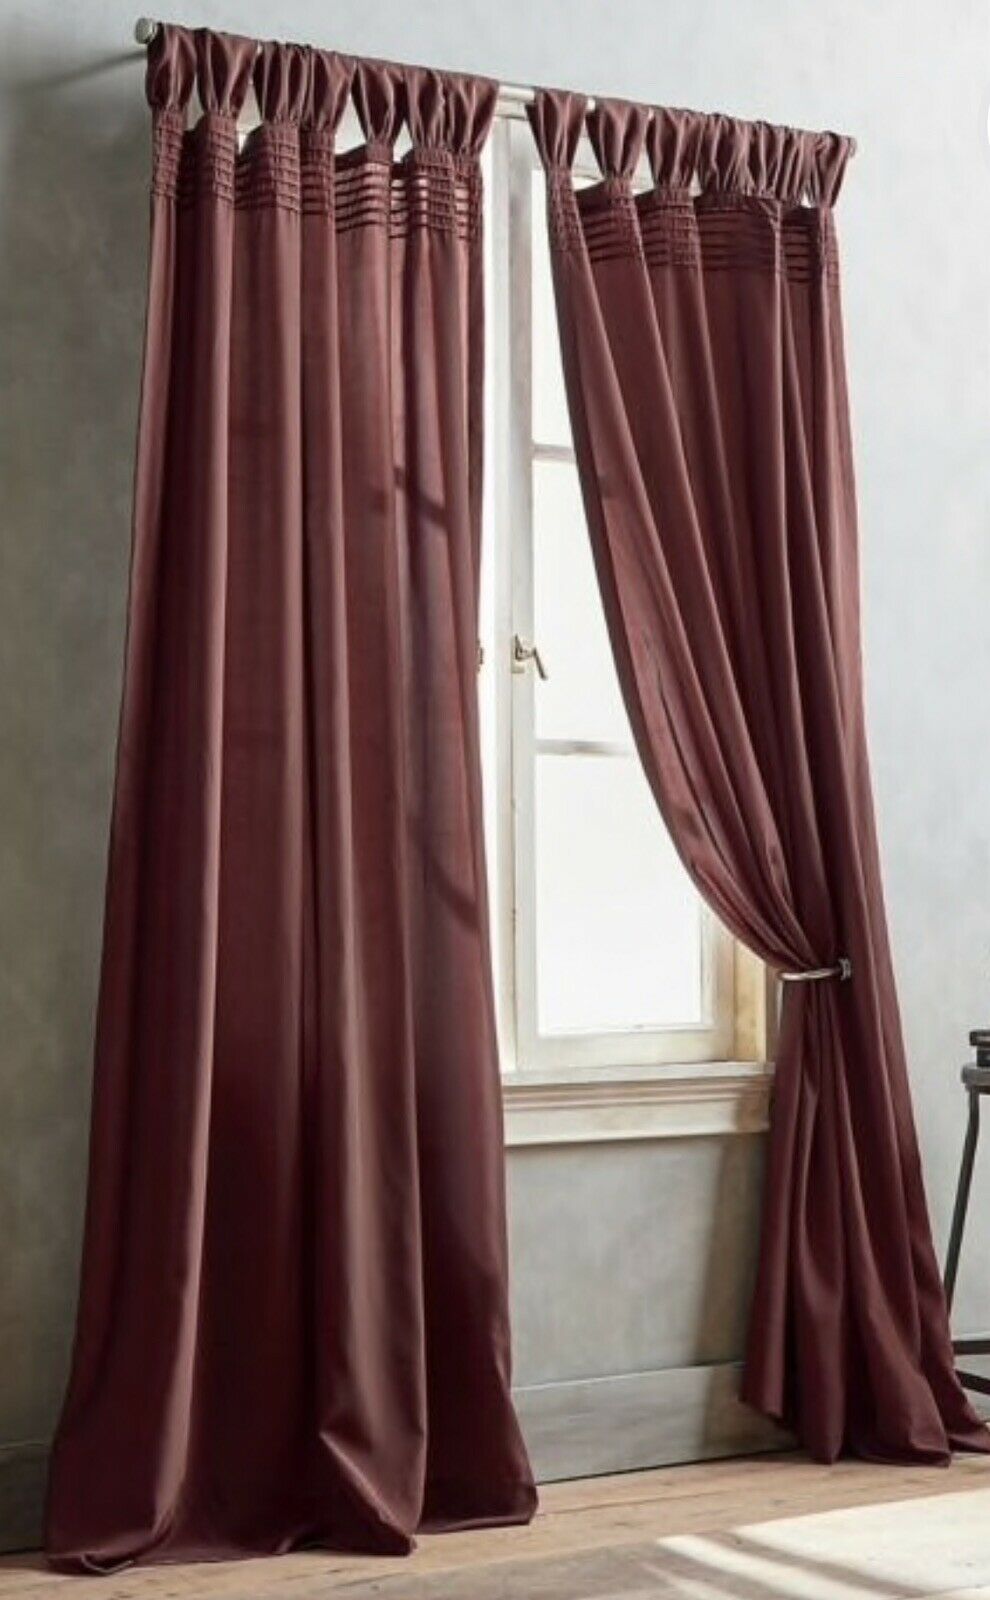 3 New Dkny City Edition Cream Window Curtain Tab Top Pleated Panels 50 X 95” Pertaining To Vue Elements Priya Tab Top Window Curtains (Photo 15 of 30)